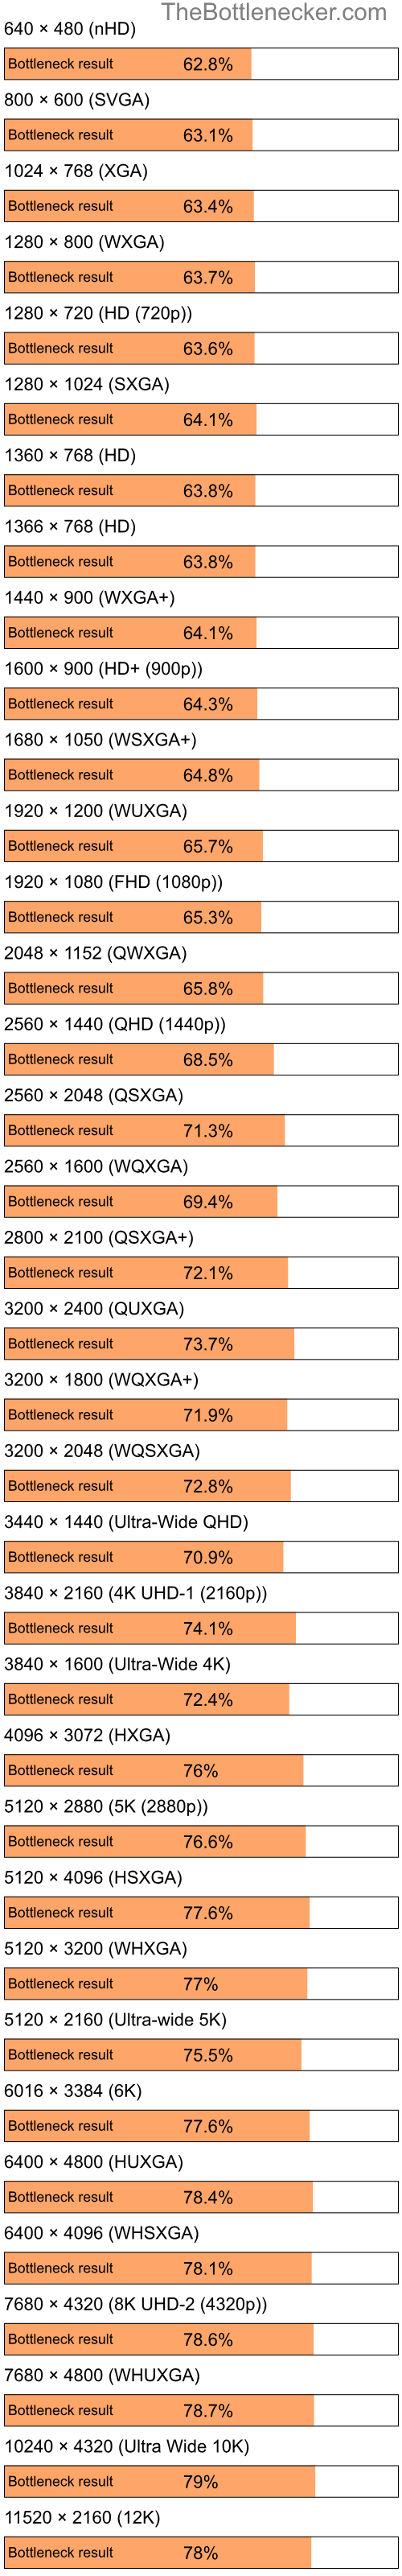 Bottleneck results by resolution for Intel Celeron and AMD Mobility Radeon HD 3450 in7 Days to Die